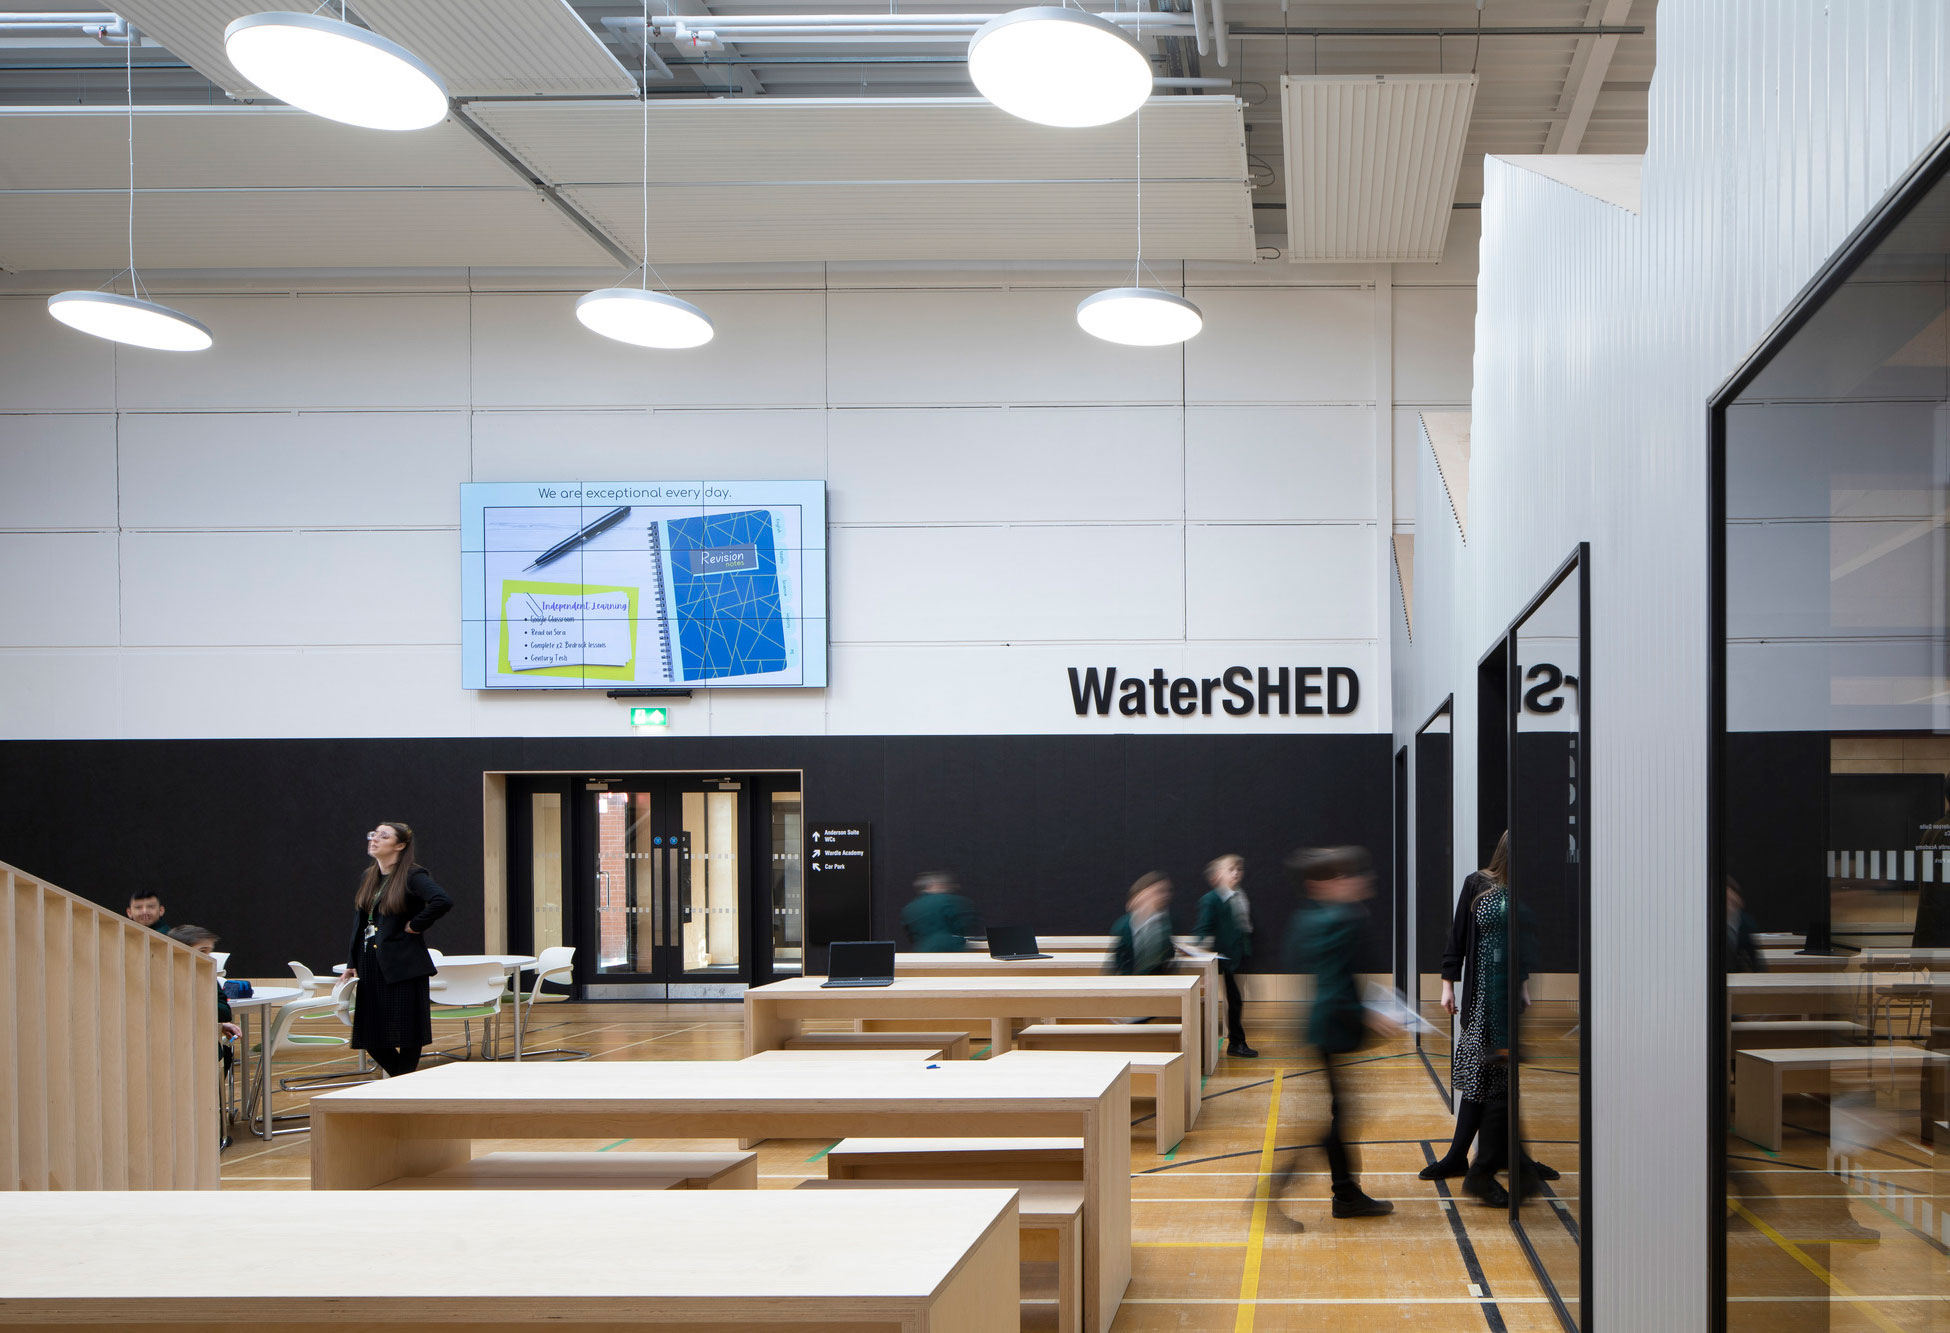 BDP’s sports hall conversion wins The Aj Architecture ‘school project of the year’ award